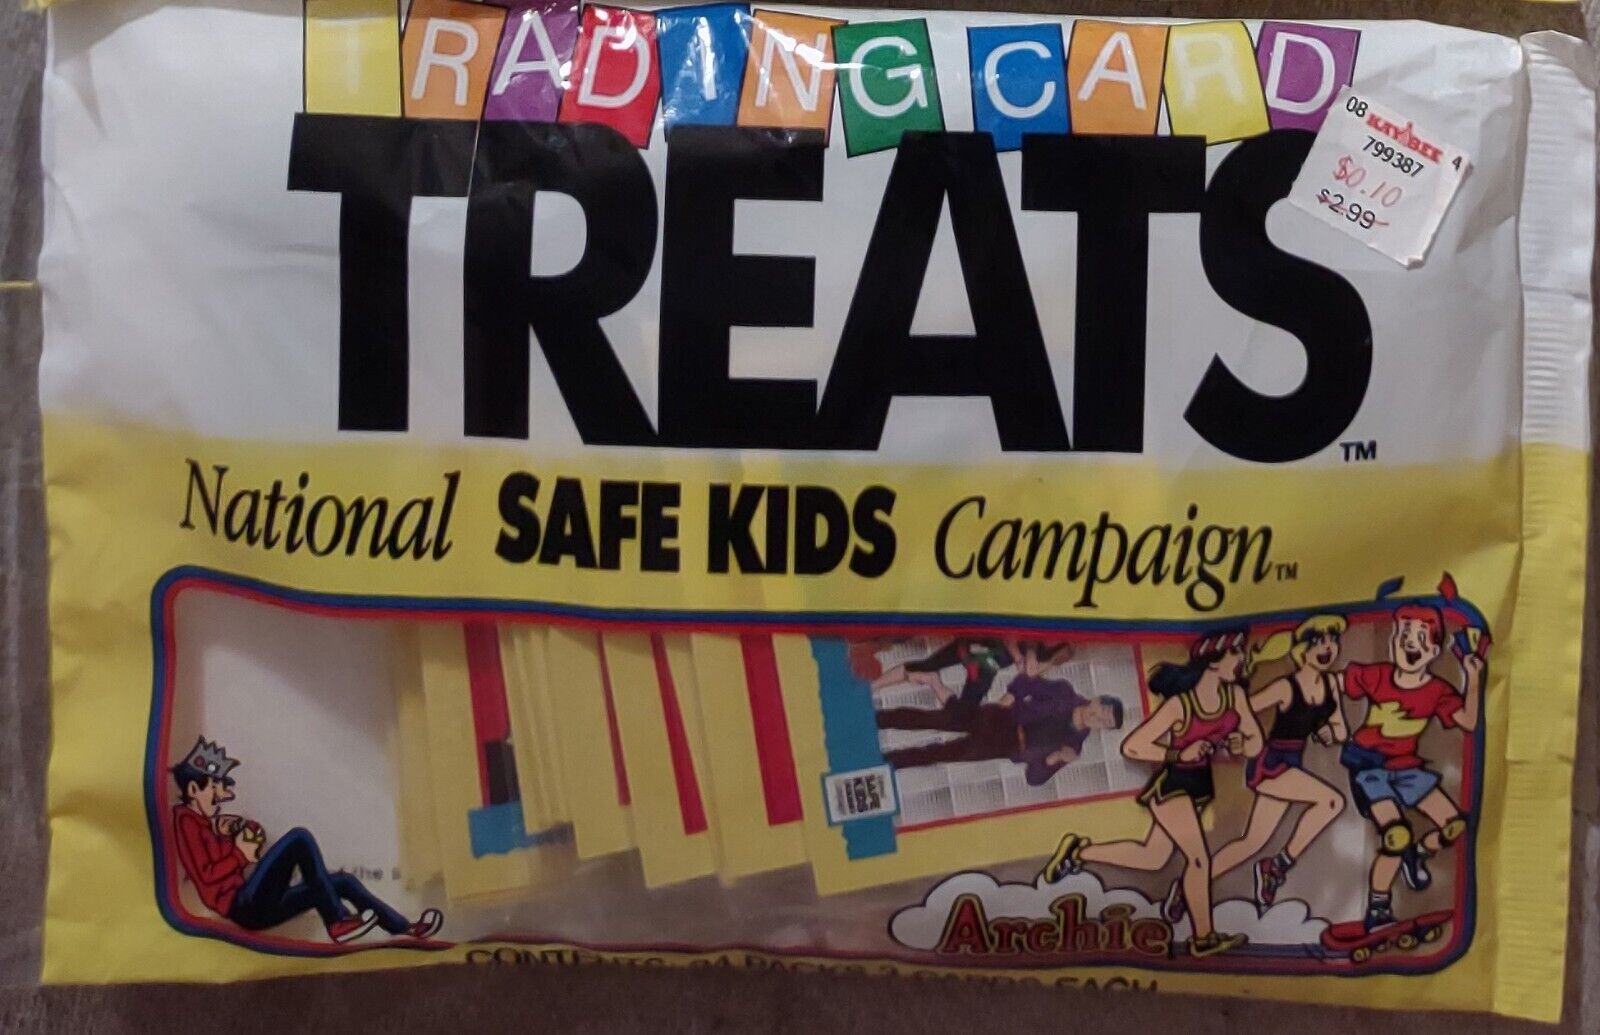 1991 IMPEL TRADING CARDS TREATS NATIONAL SAFE KIDS CAMPAIGN 24 PACKS ARCHIE